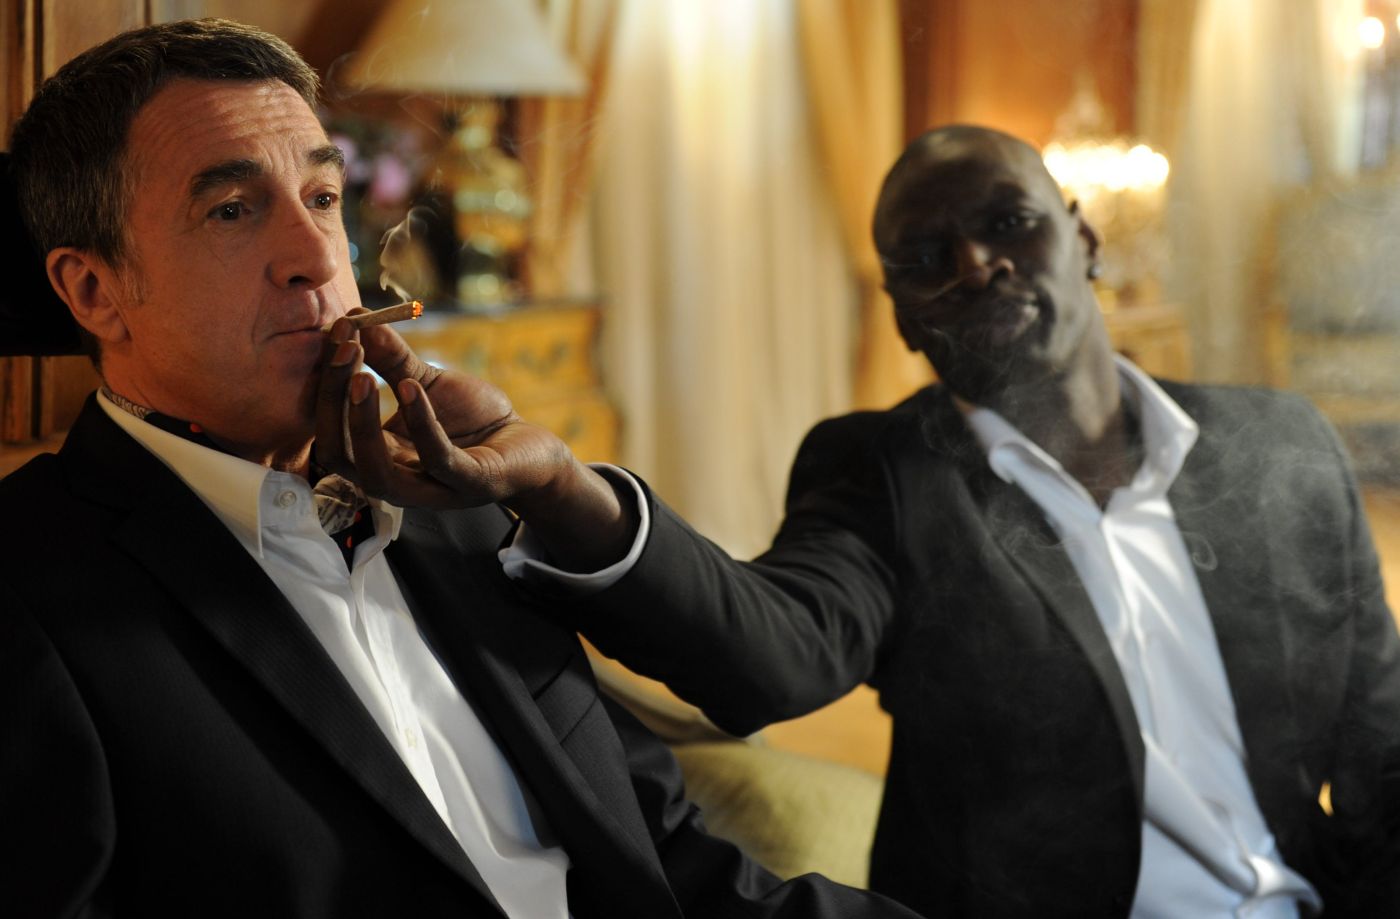 The Intouchables (2011) by Olivier Nakache